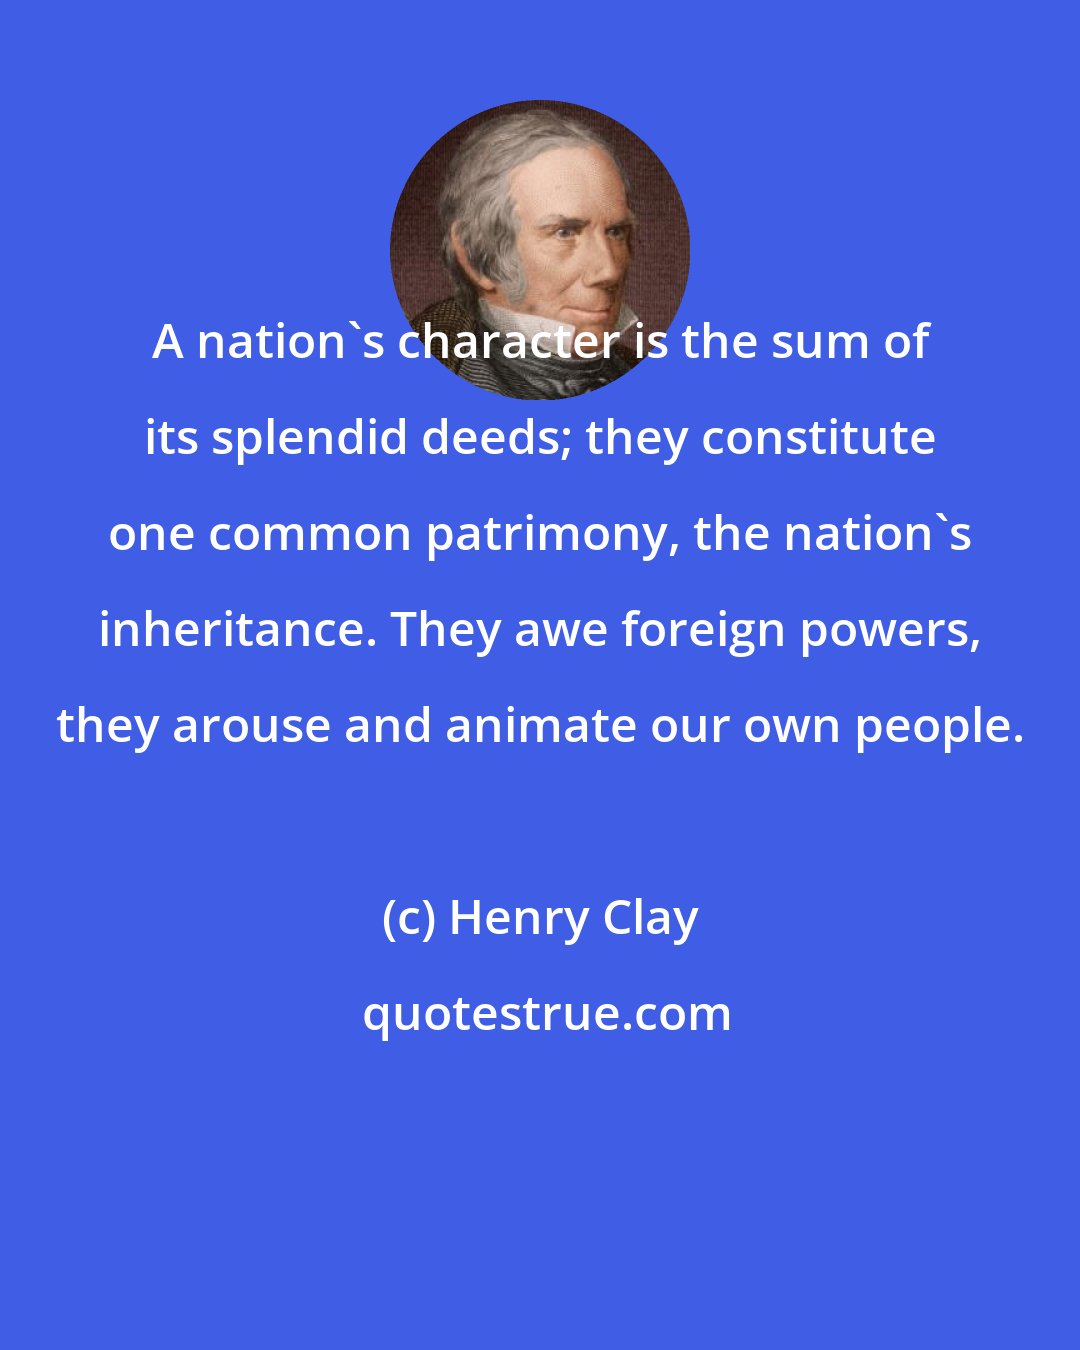 Henry Clay: A nation's character is the sum of its splendid deeds; they constitute one common patrimony, the nation's inheritance. They awe foreign powers, they arouse and animate our own people.